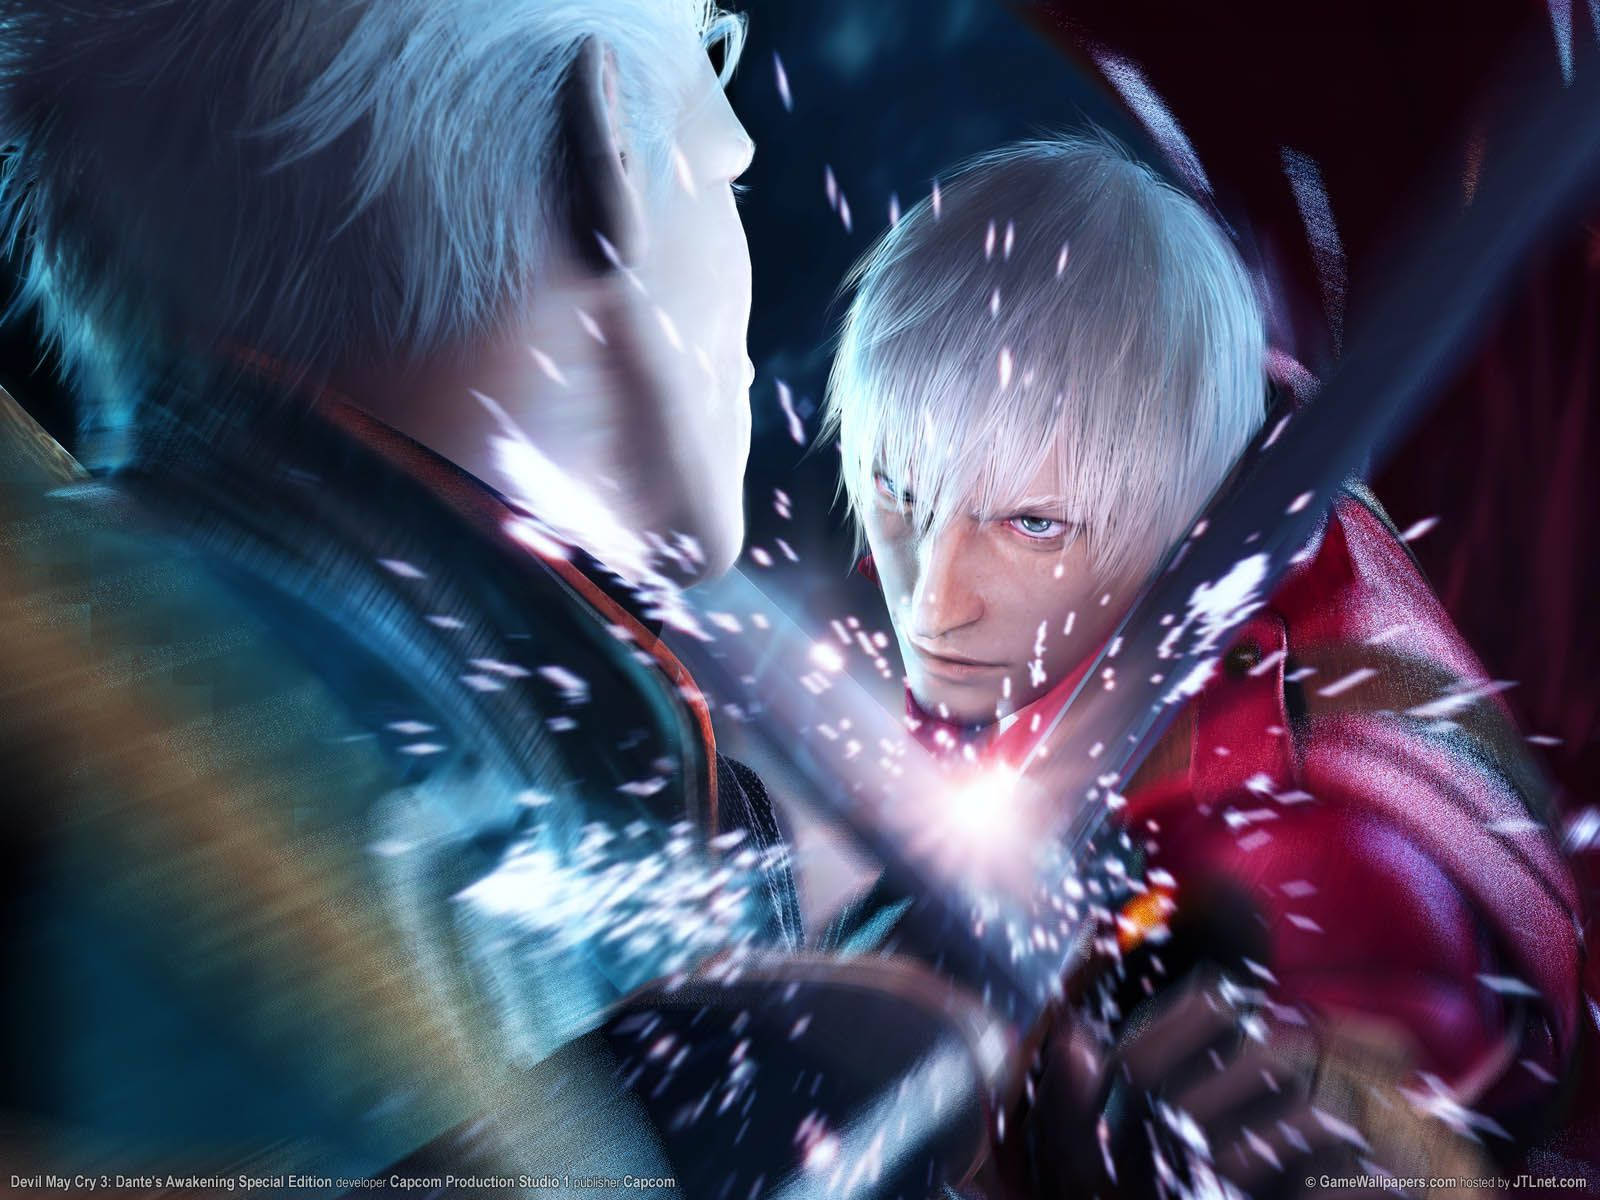 Vergil and Dante prepare to duel in Devil May Cry. Wallpaper